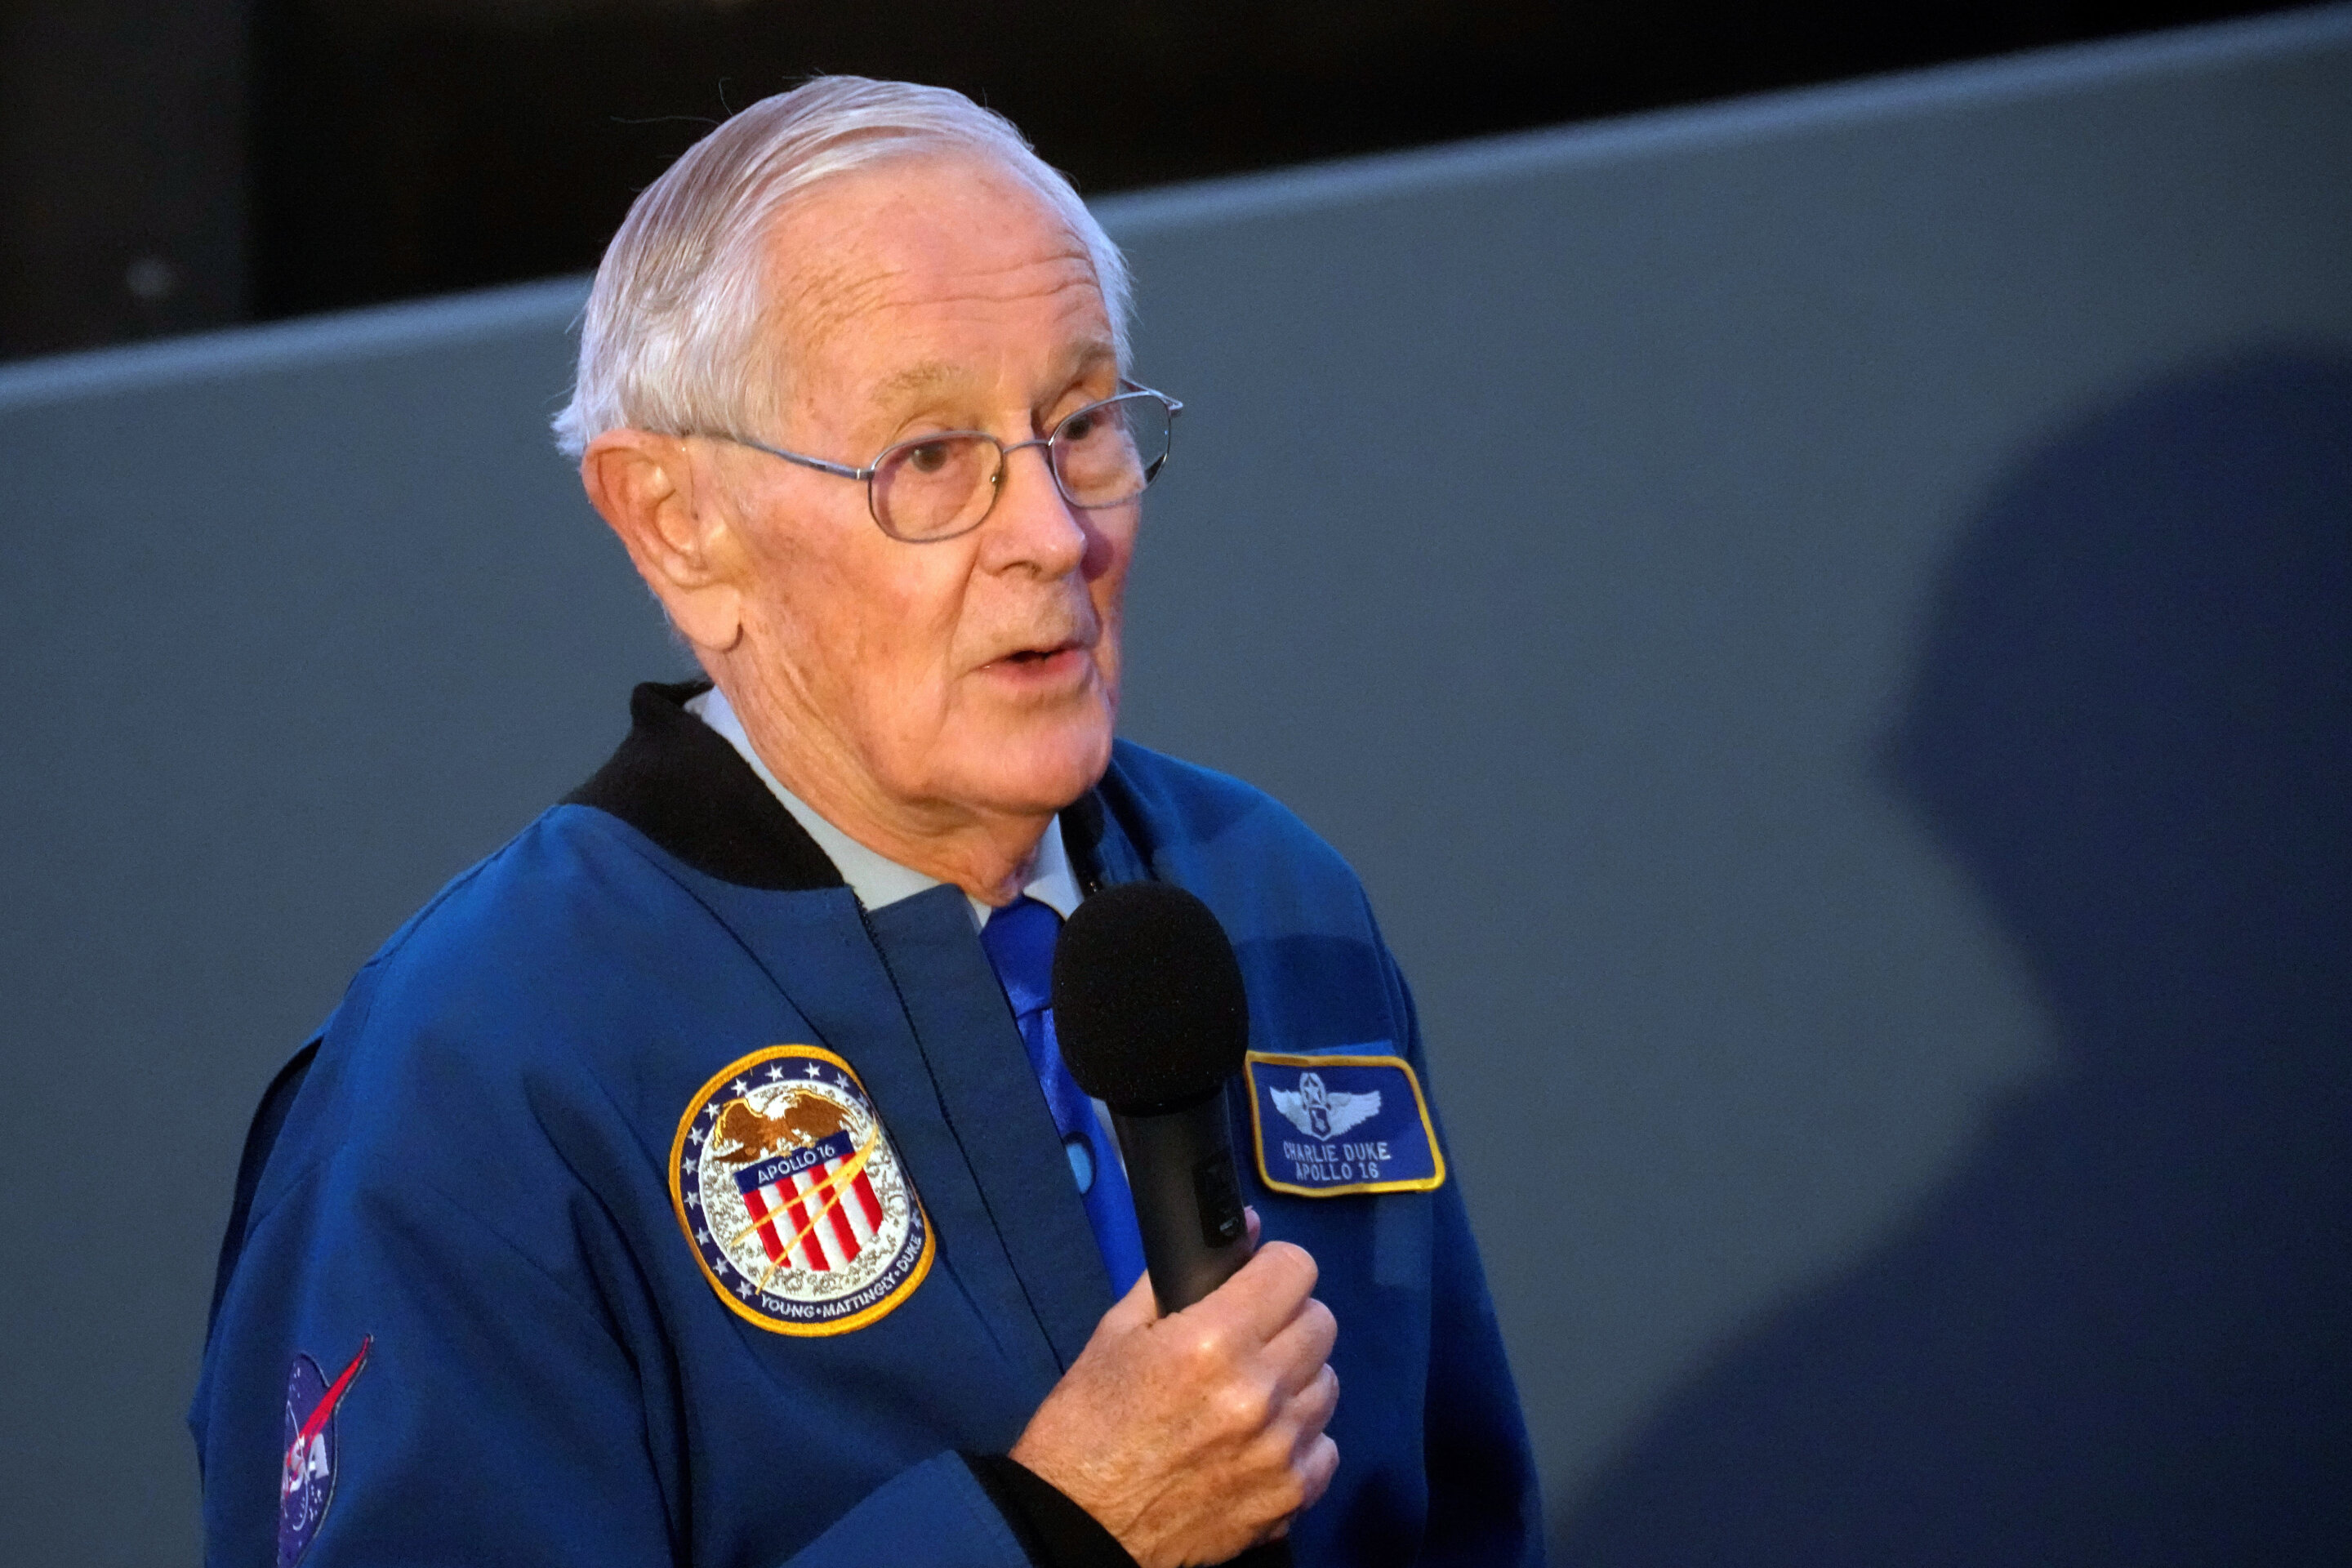 #50 years on, Apollo 16 moonwalker still ‘excited’ by space